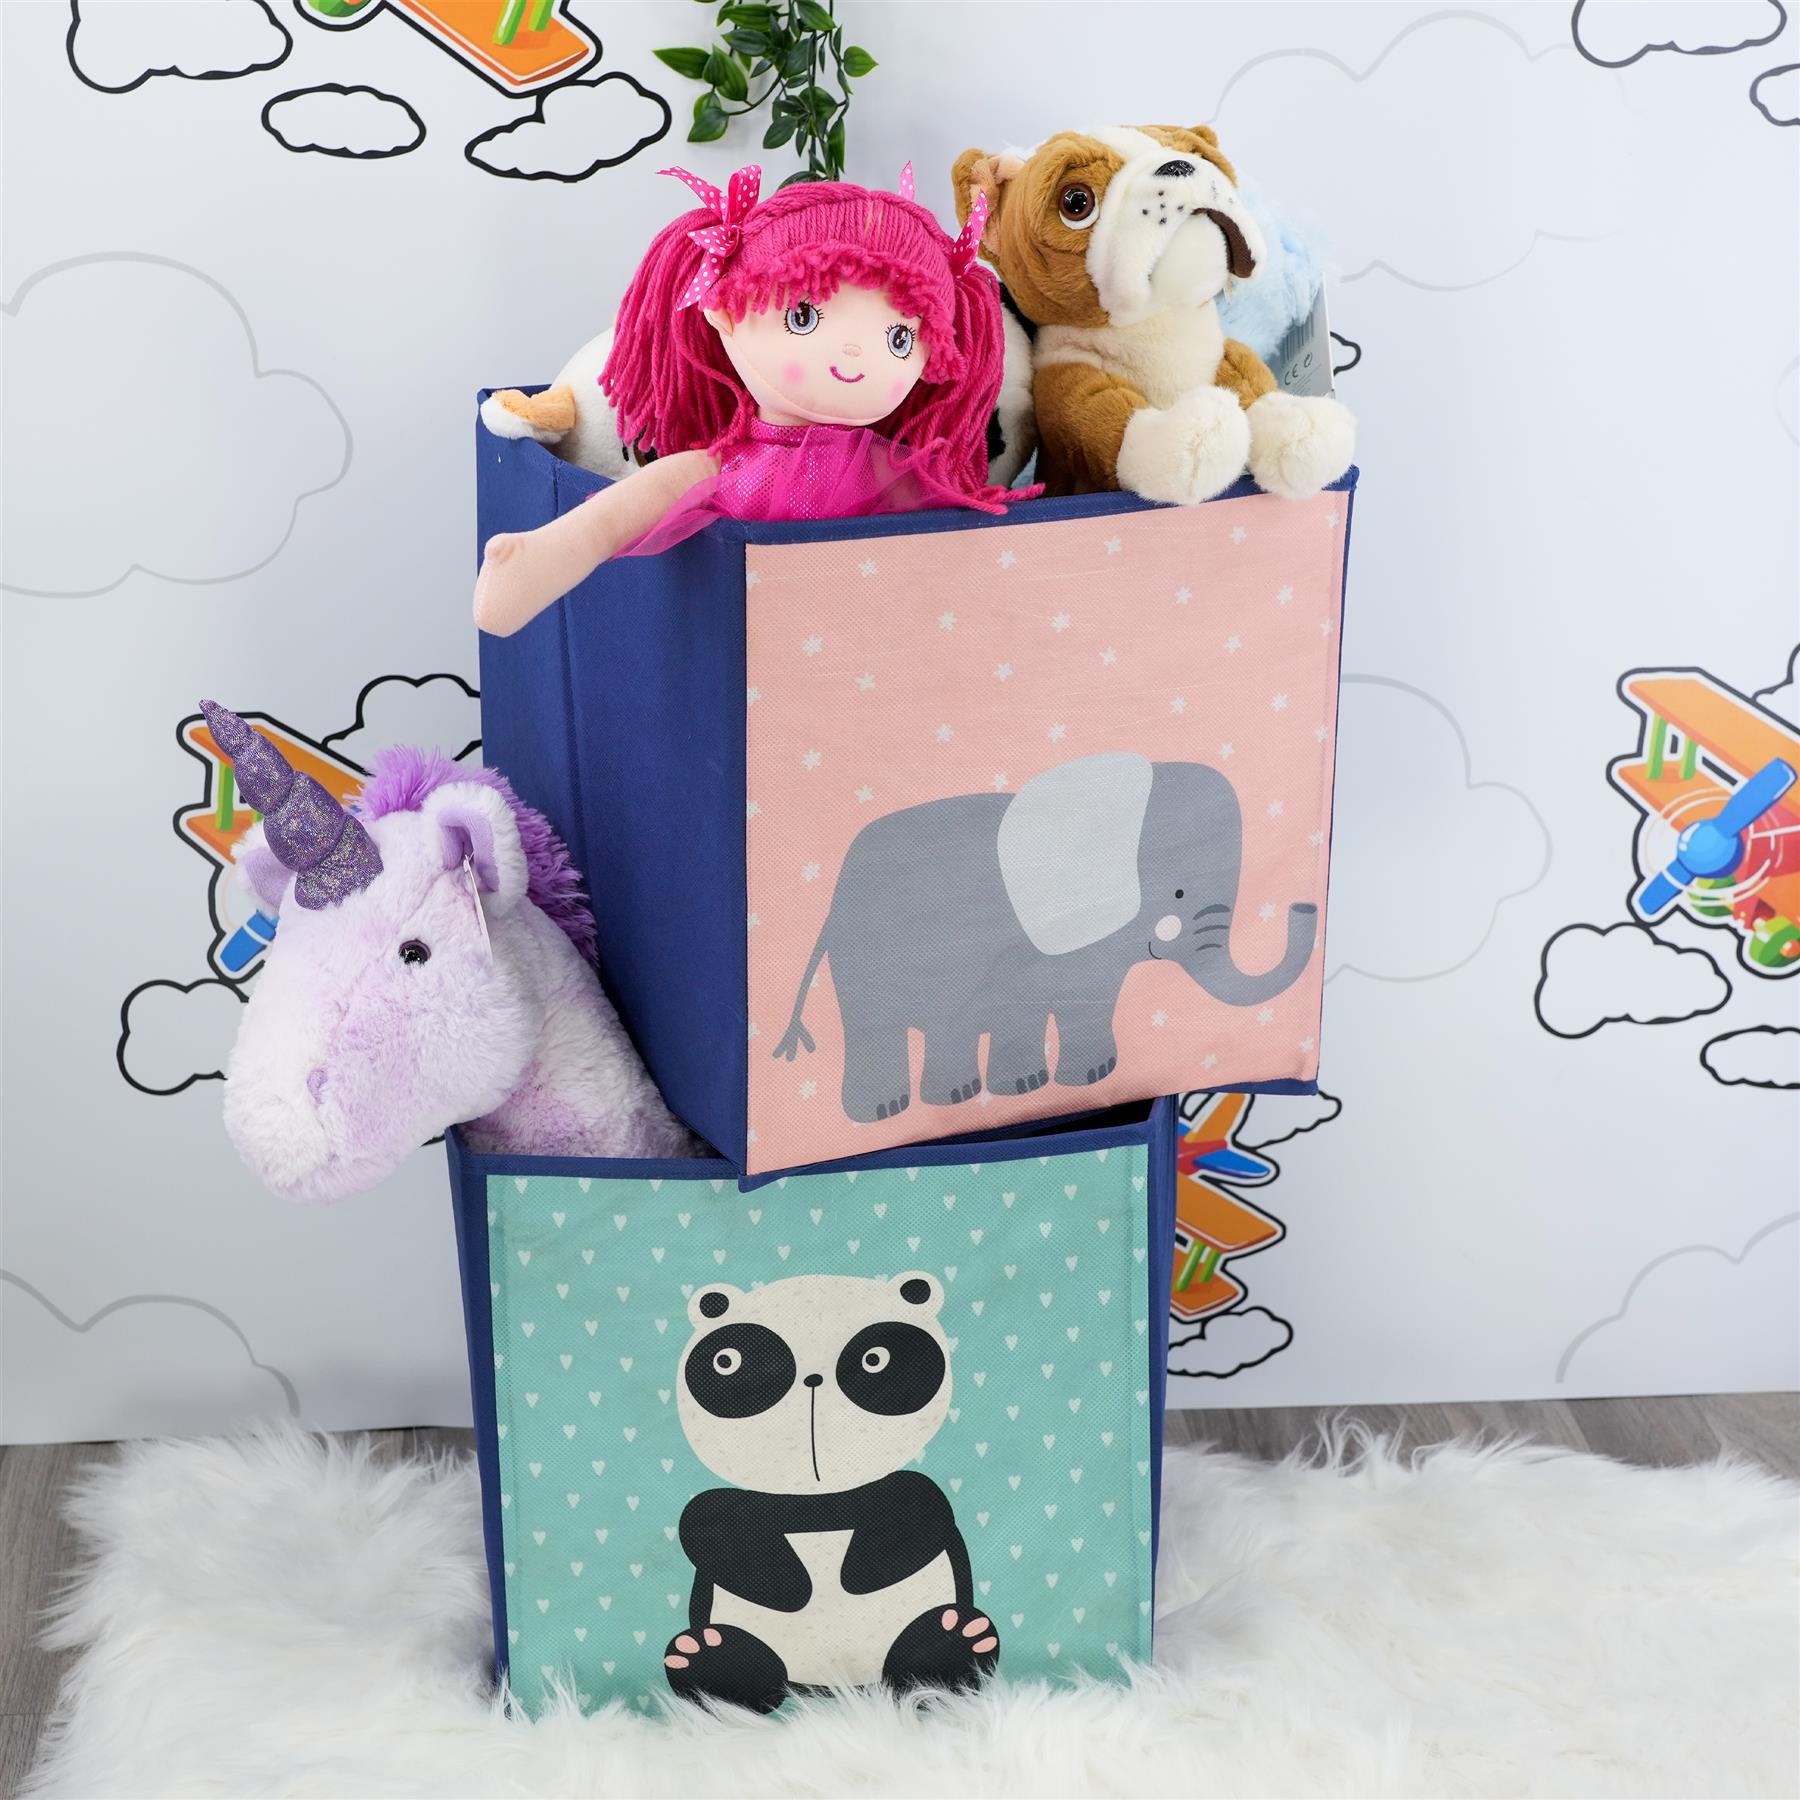 Set of 4 Animal Design Storage Boxes by The Magic Toy Shop - The Magic Toy Shop